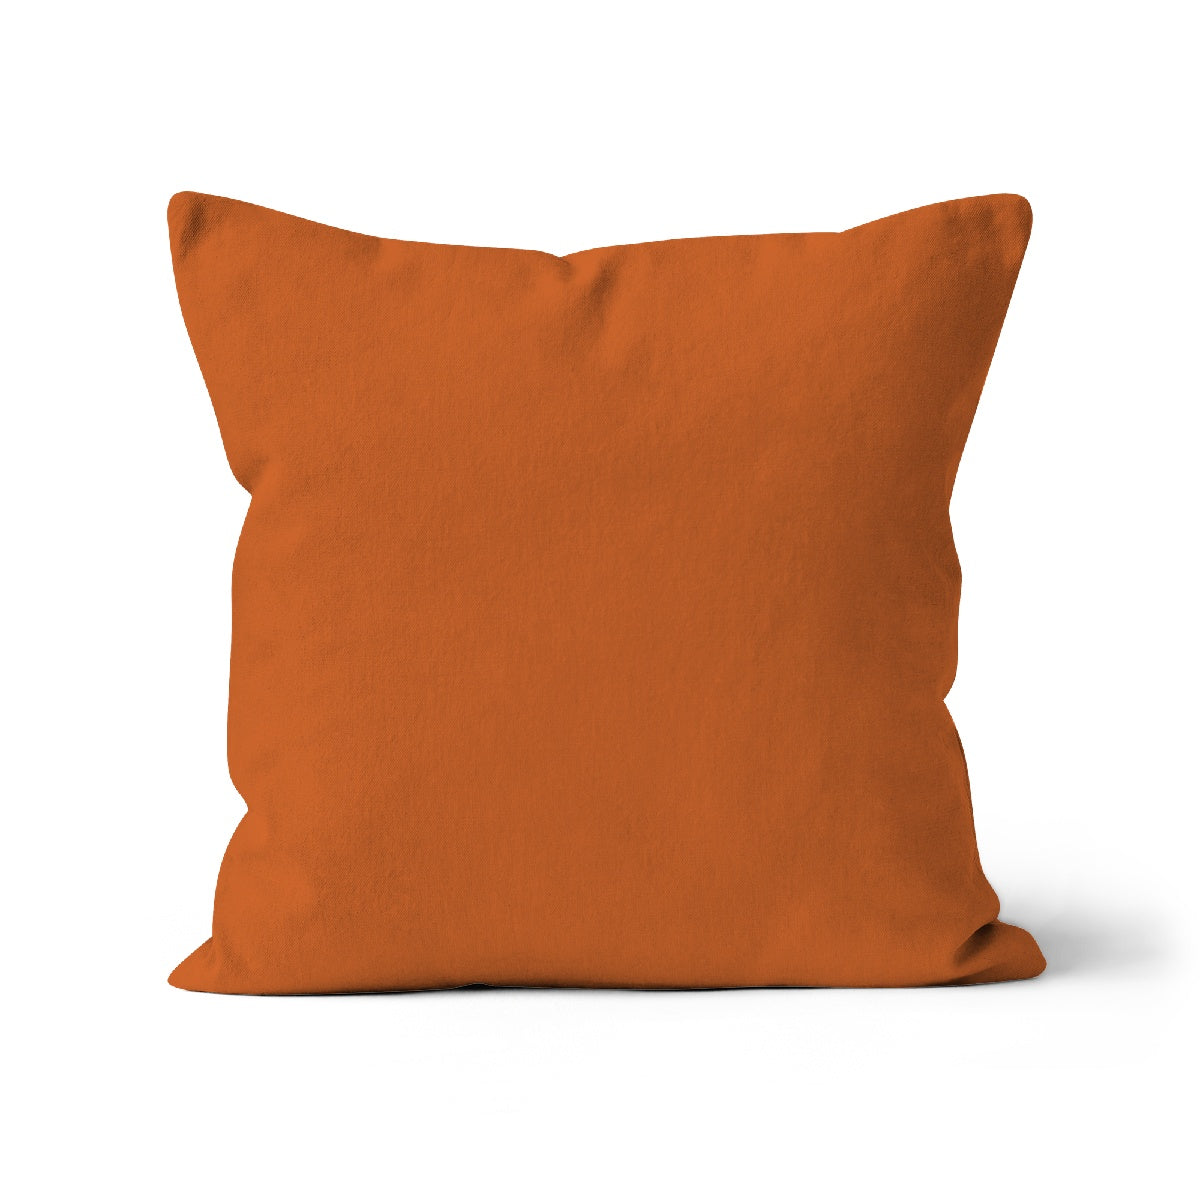 burnt orange organic cotton cushion cover, square shaped eco friendly, made in UK